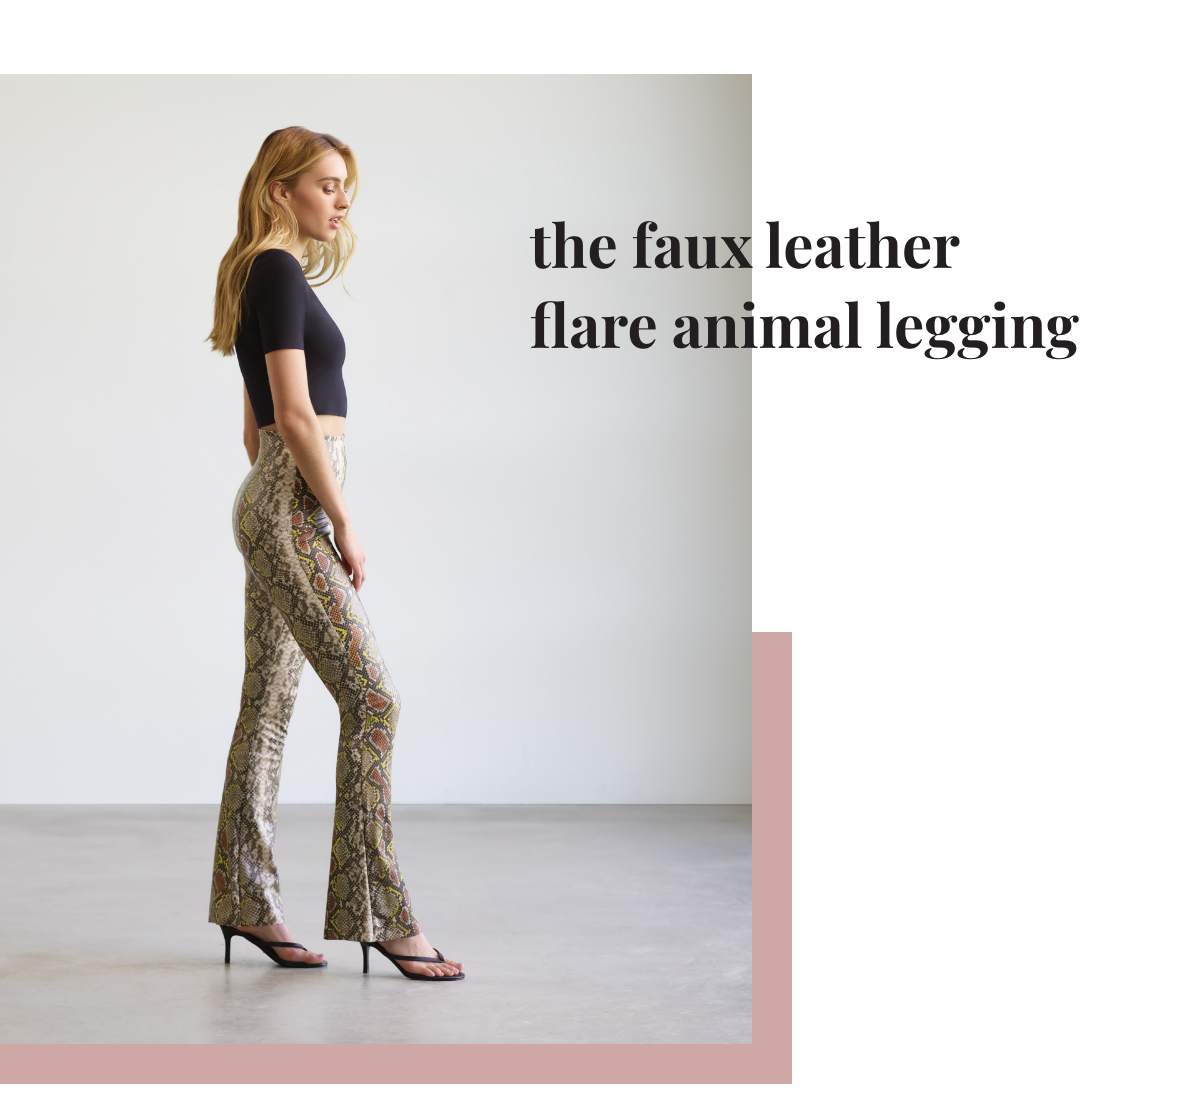 The Faux Leather Flare Animal Legging